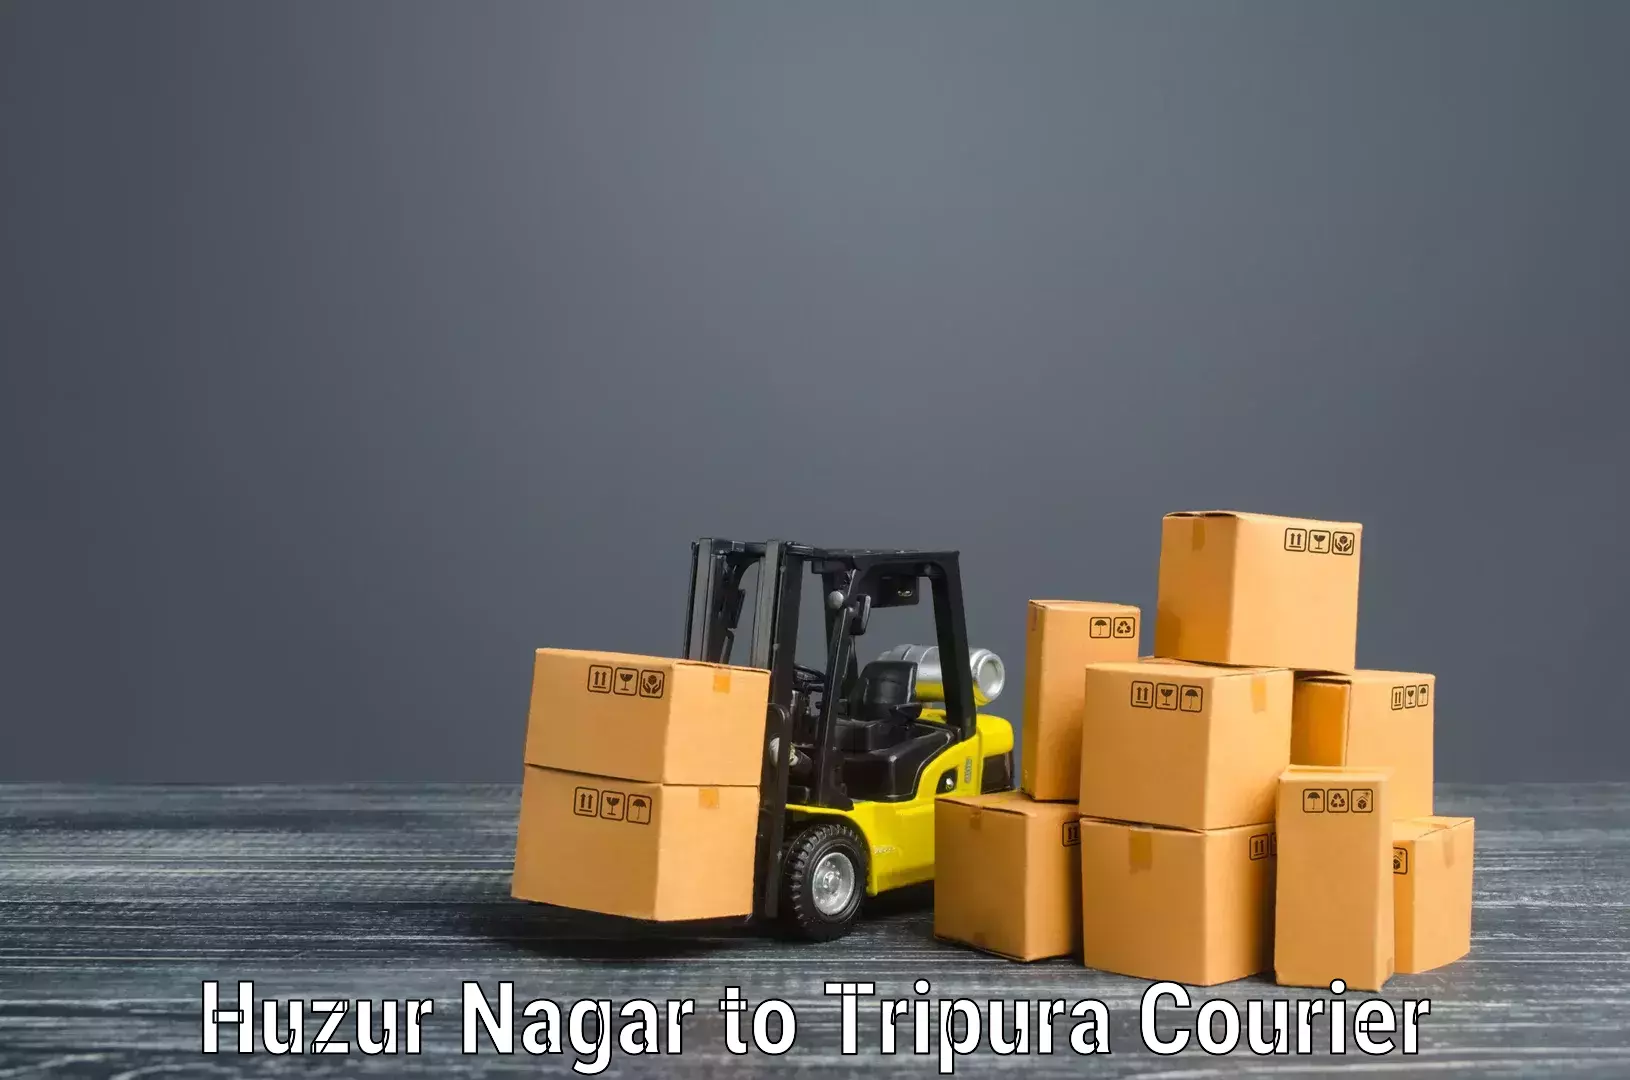 Reliable moving assistance in Huzur Nagar to Kailashahar